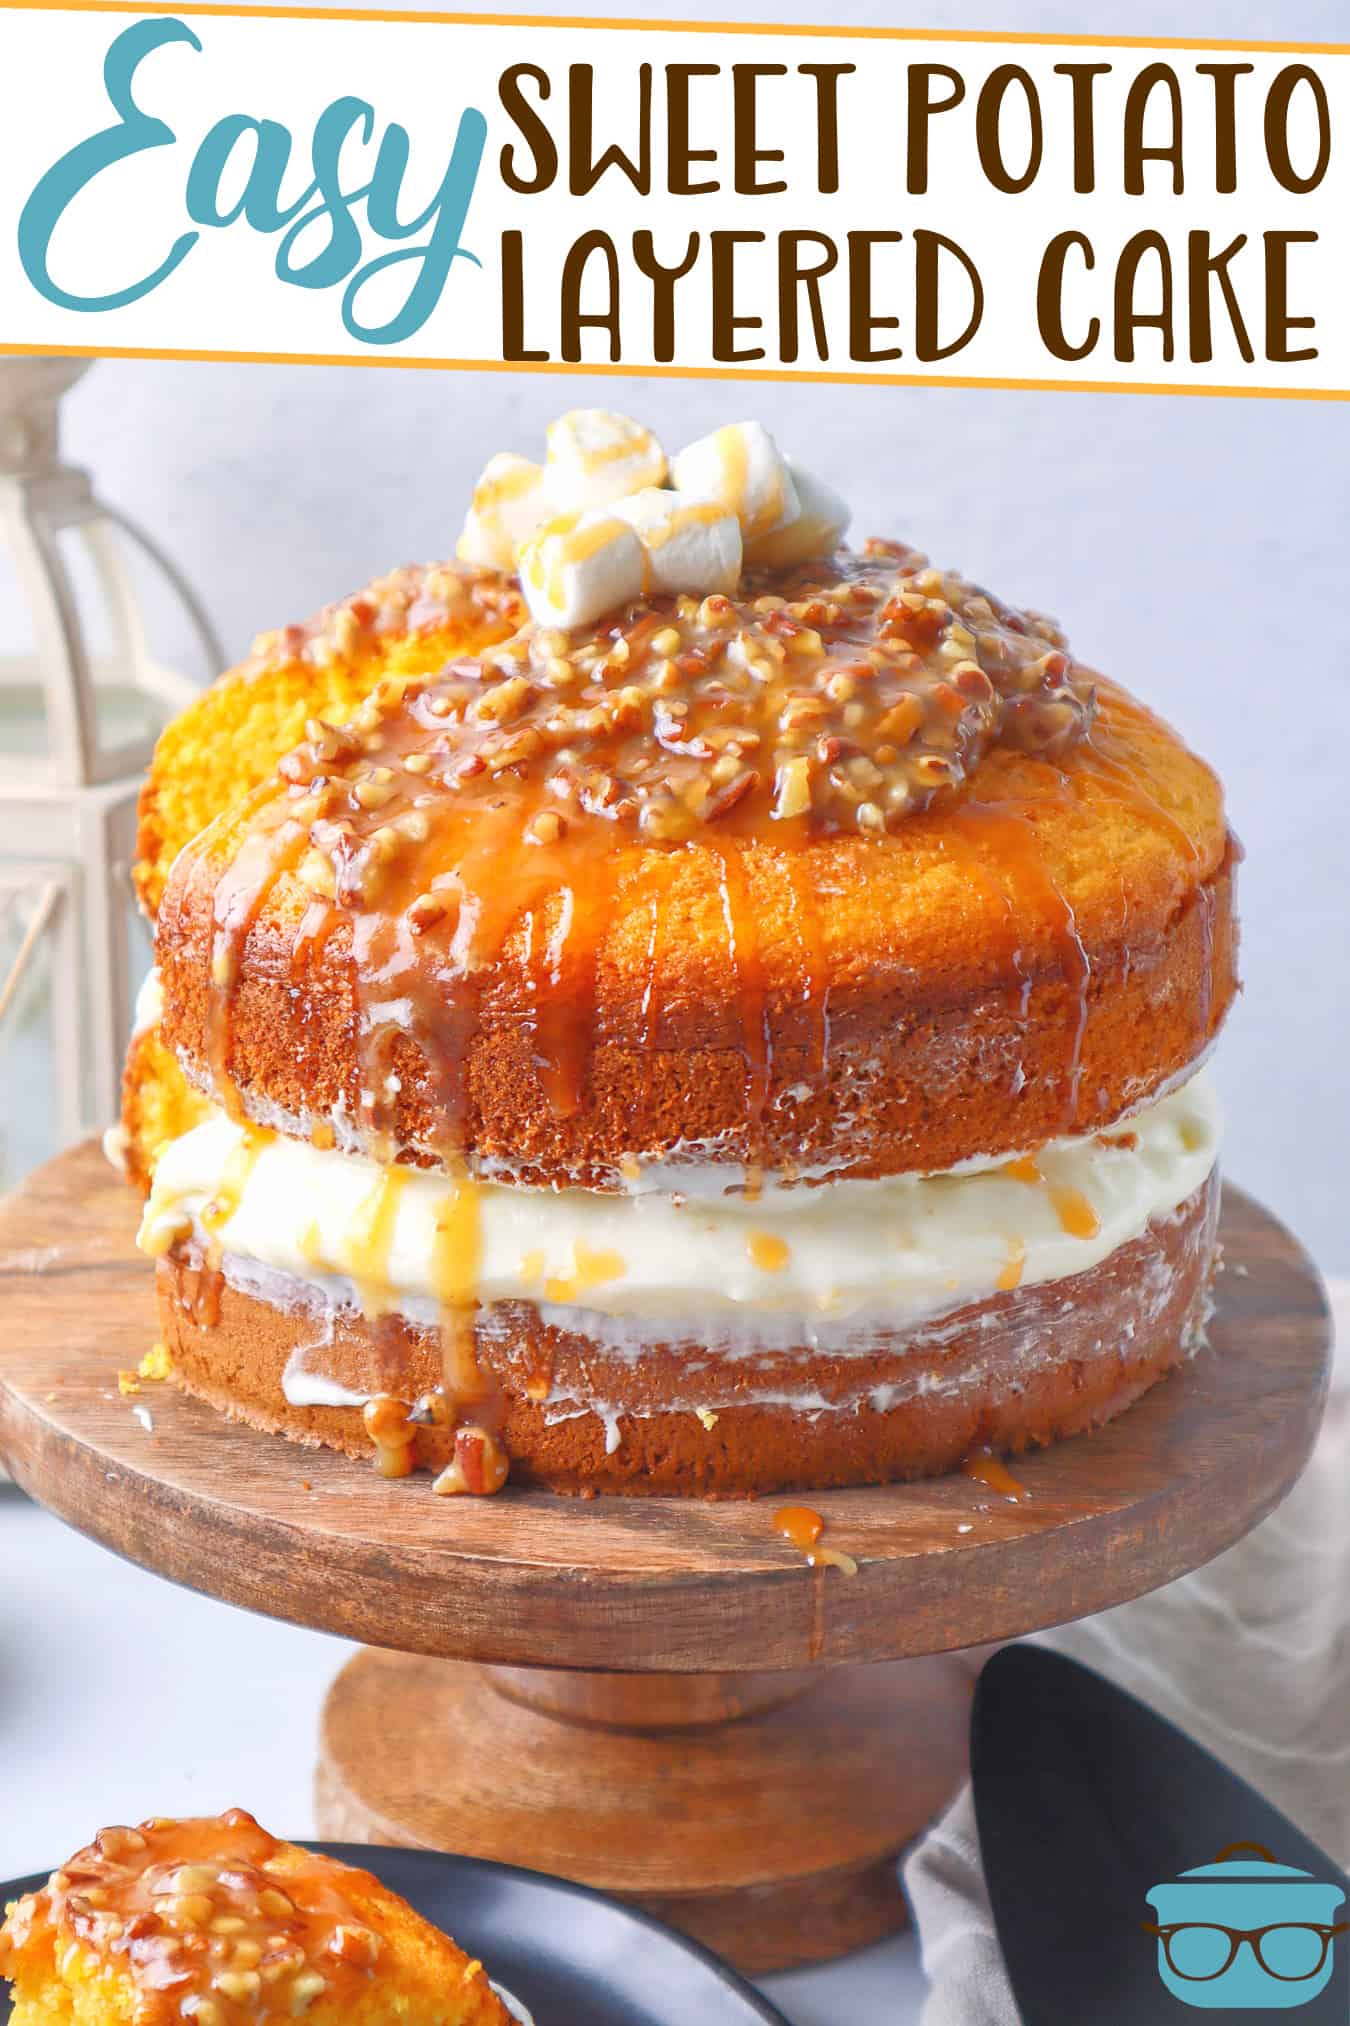 Easy Sweet Potato Layered Cake recipe from The Country Cook, cake shown on a wooden pedestal with a slice of cake removed and on a plate in the front of the cake.